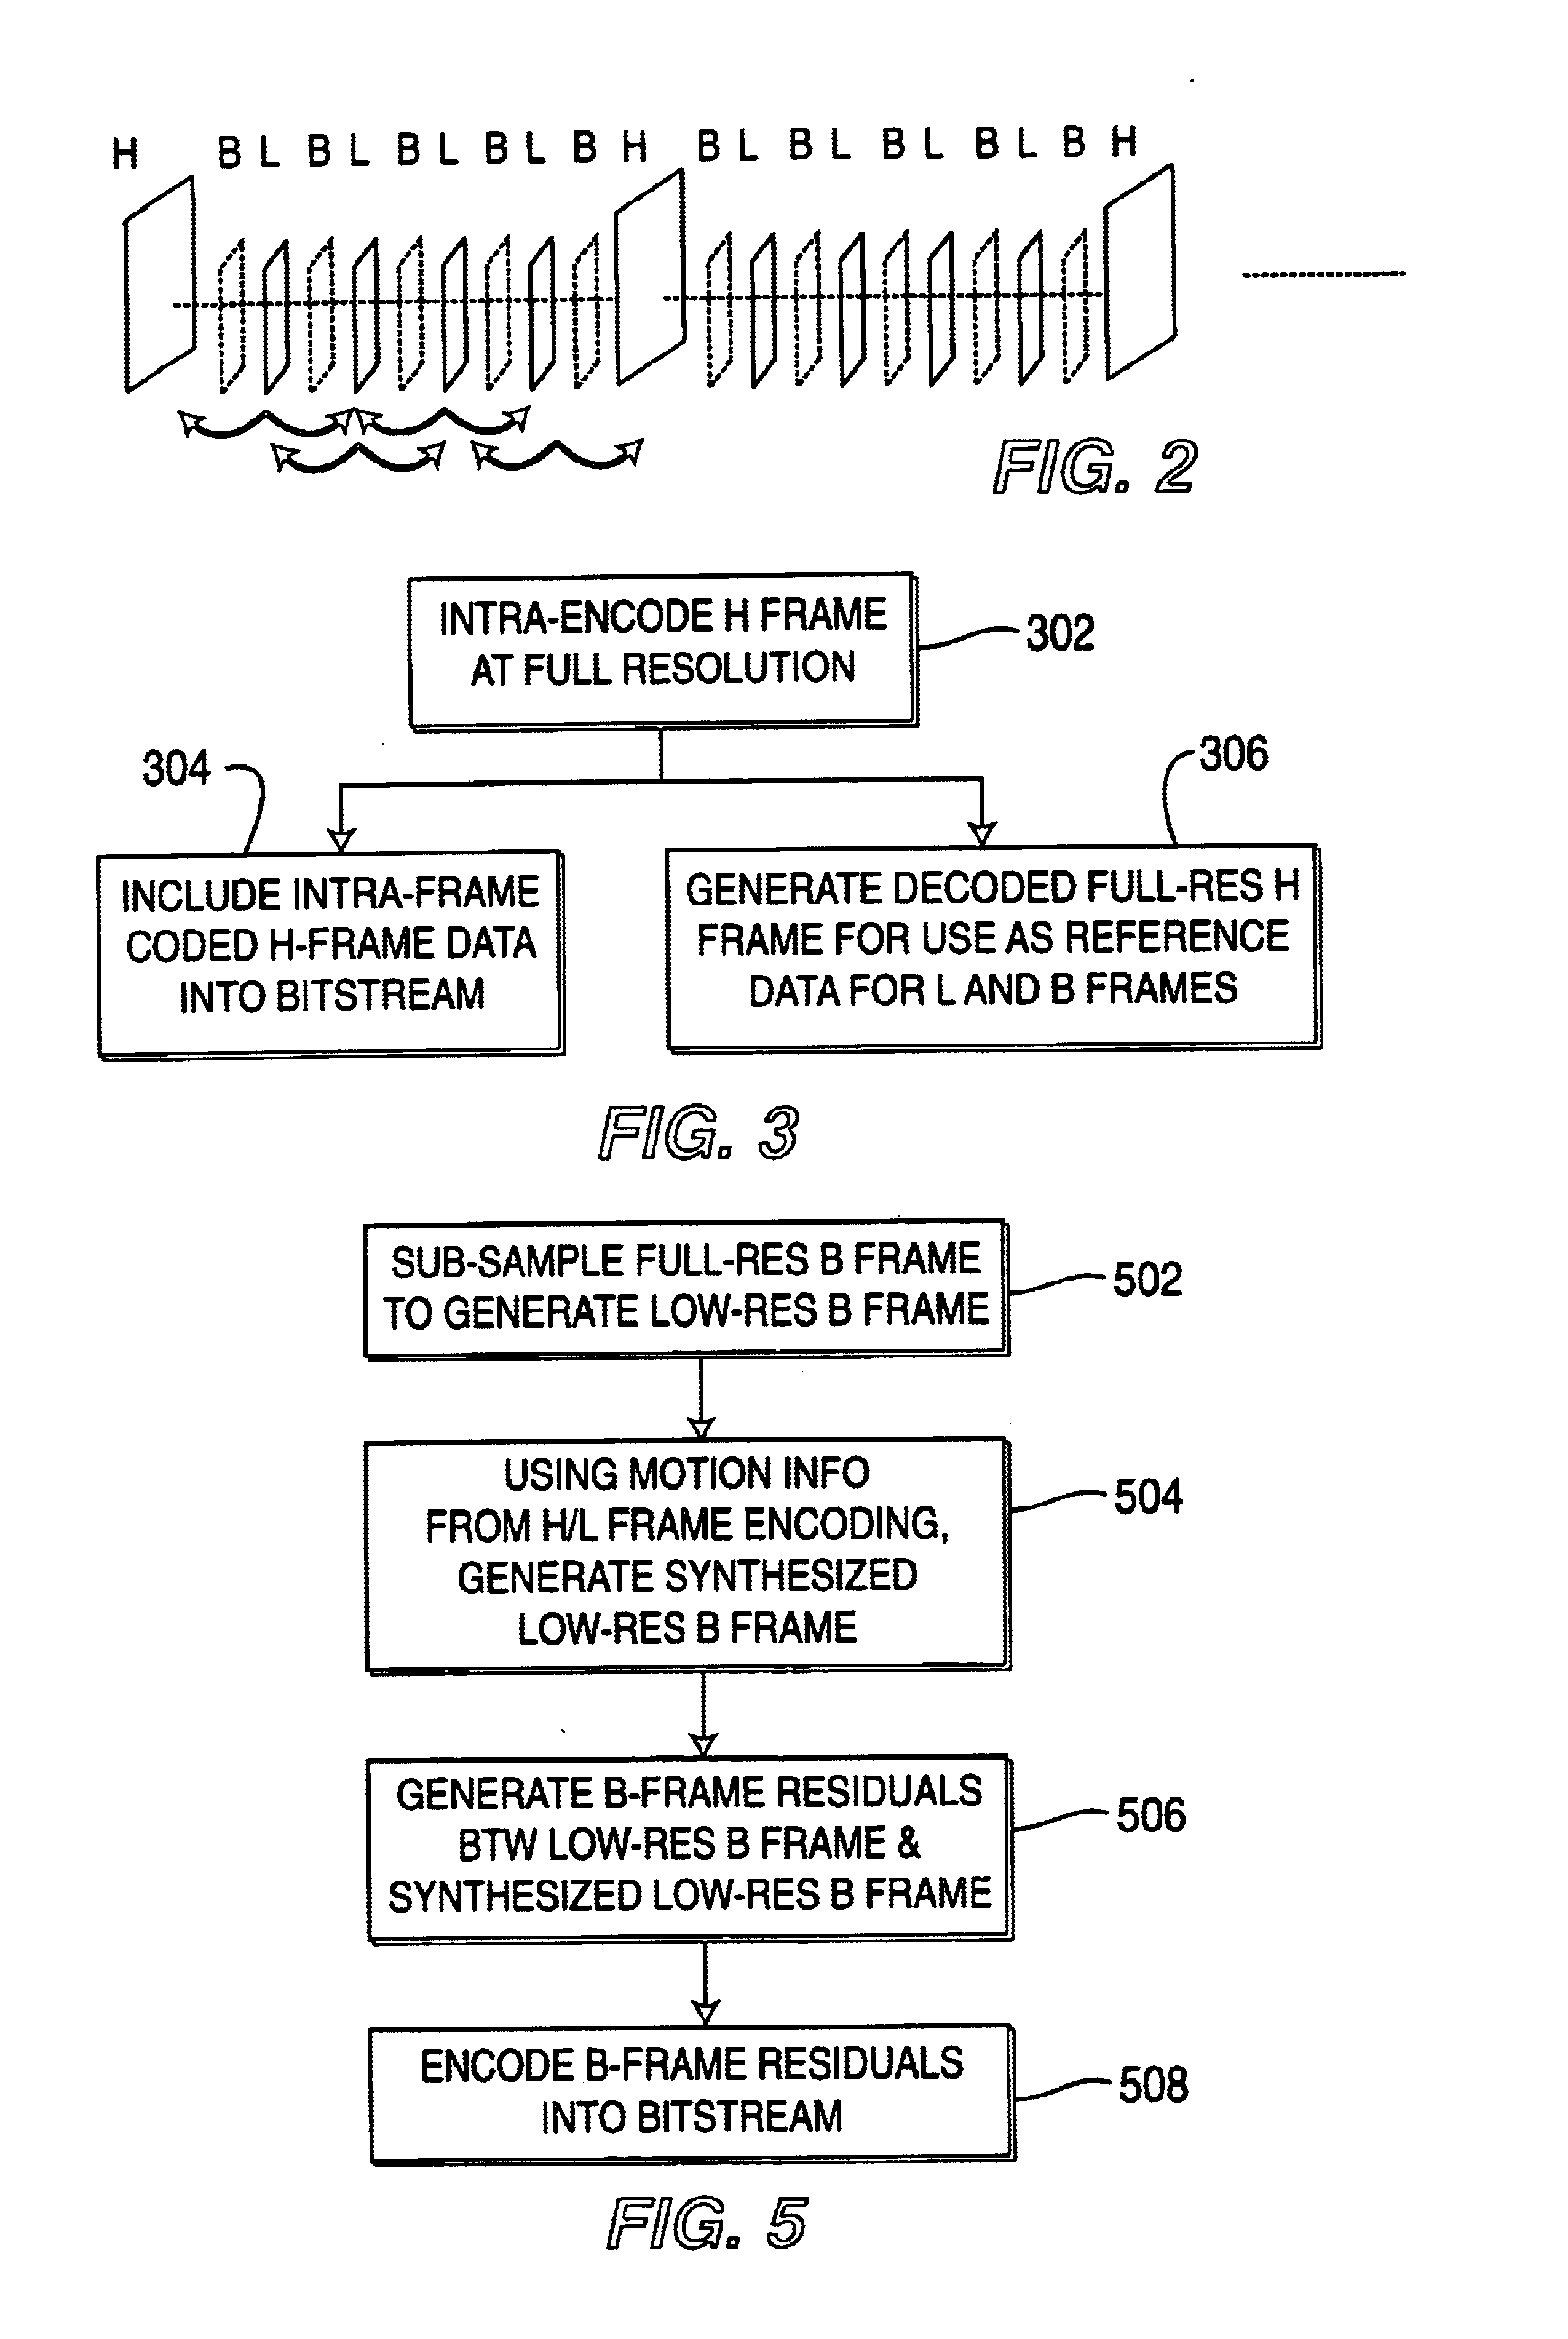 Tweening-based codec for scaleable encoders and decoders with varying motion computation capability